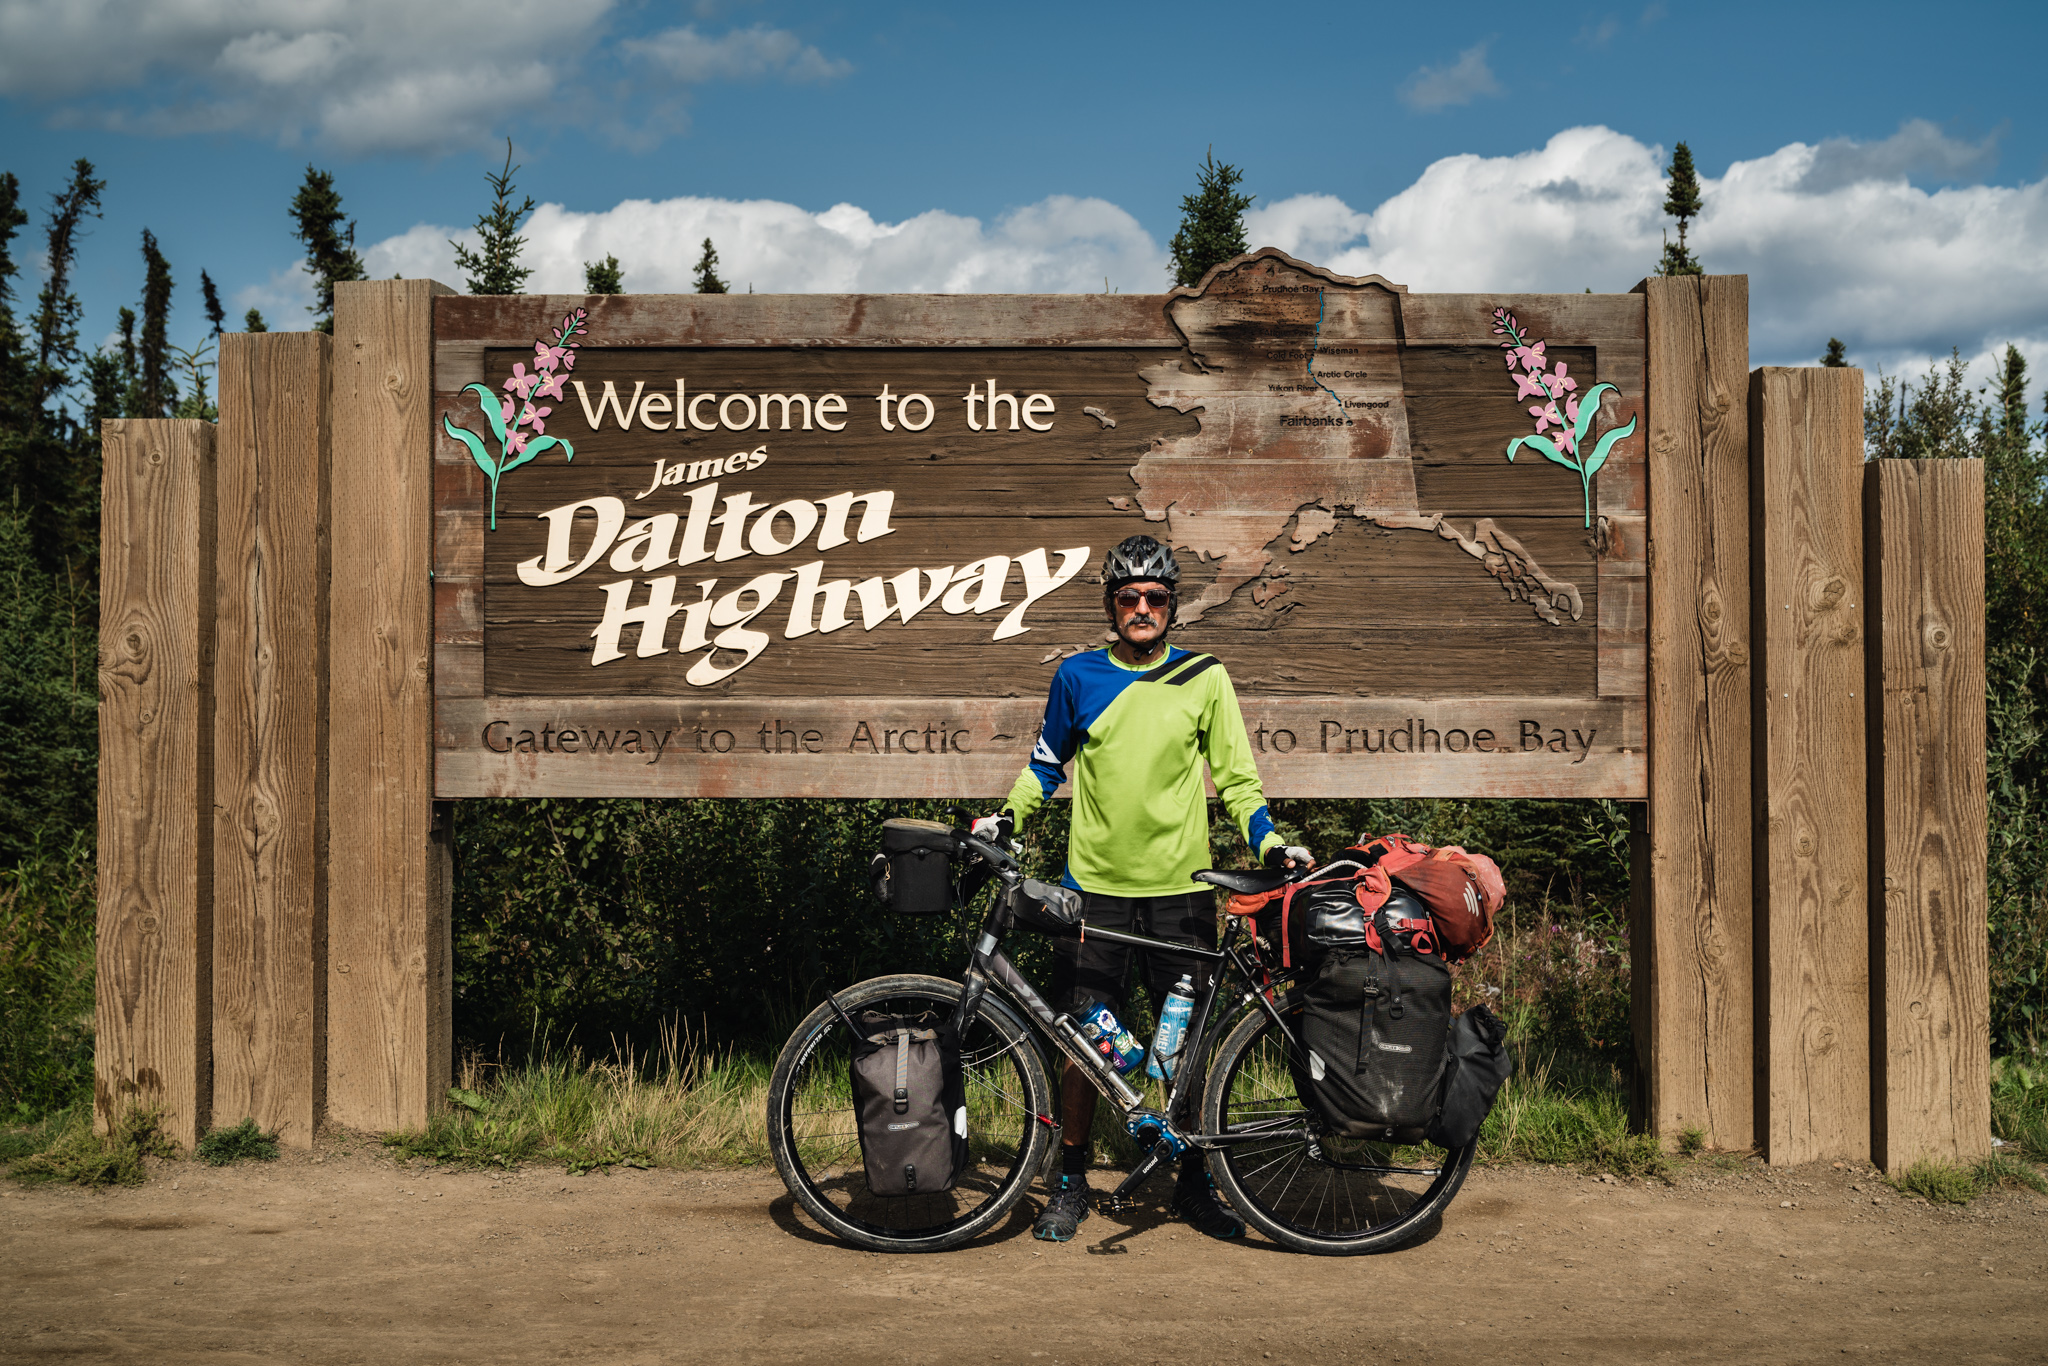 Kamran Ali  posing for a photo on the welcome sign to the James Dalton Highway